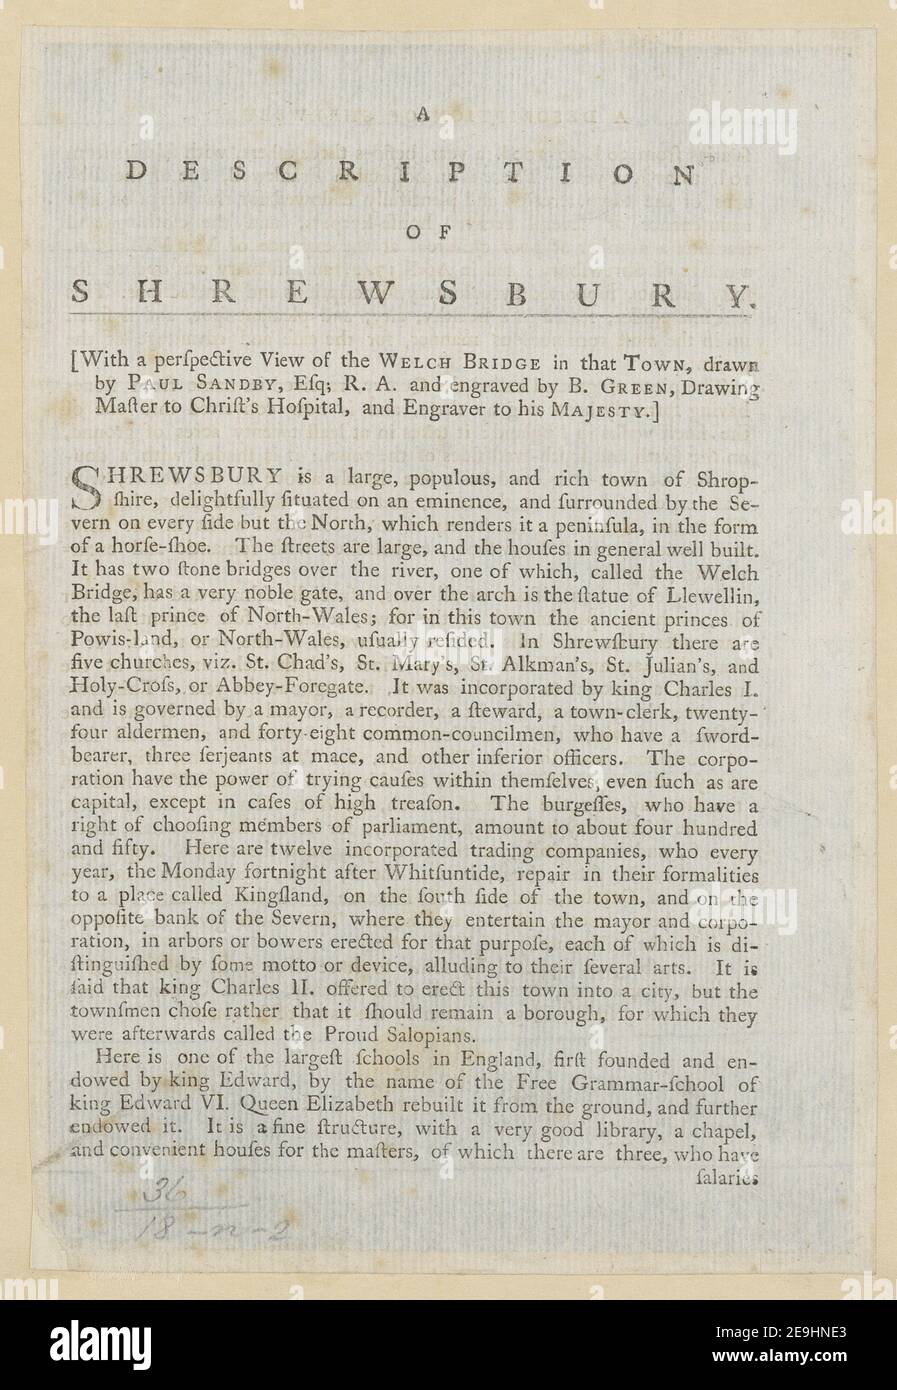 A DESCRIPTION OF SHREWSBURY. Author  Kearsley, George 36.18.n.2. Place of publication: [London] Publisher: [George Kearsley the Elder] Date of publication: [1778]  Item type: 1 sheet Medium: letterpress, recto and verso Dimensions: 24.6 x 16.7 cm  Former owner: George III, King of Great Britain, 1738-1820 Stock Photo